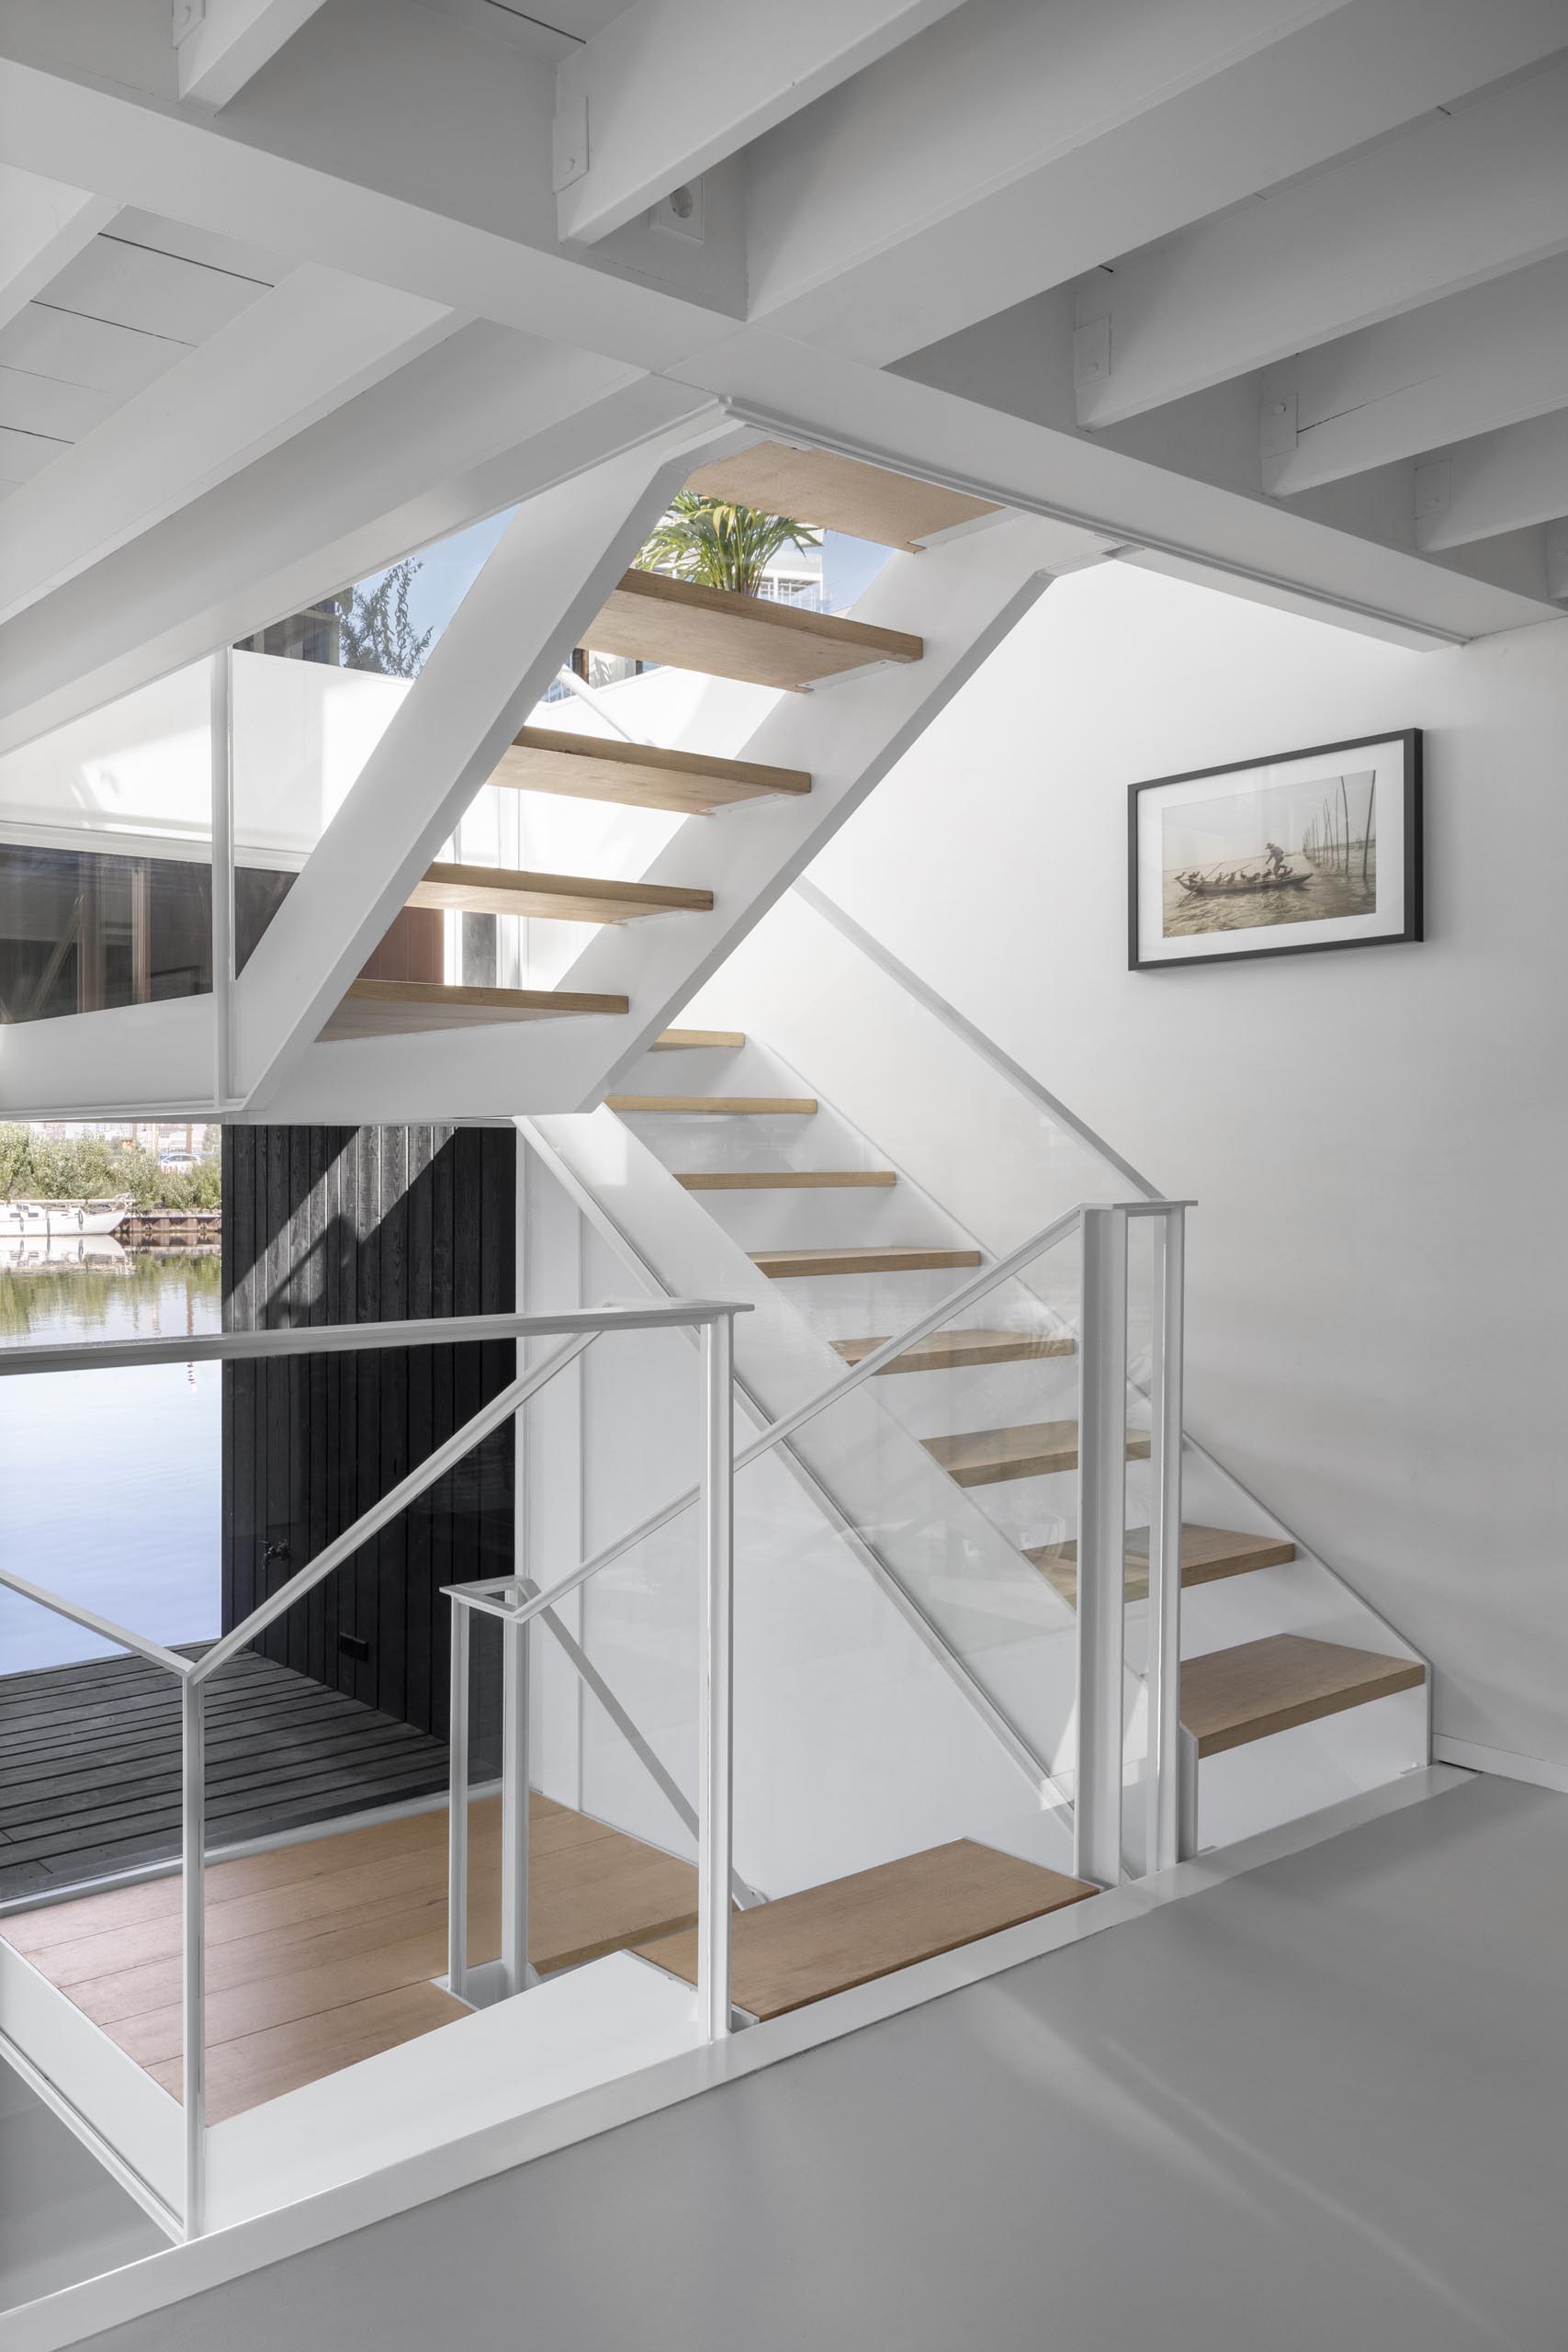 A white staircase in this modern float home matches the walls and ceiling, connects the various levels of the float home, and adds a warm wood element to the space.